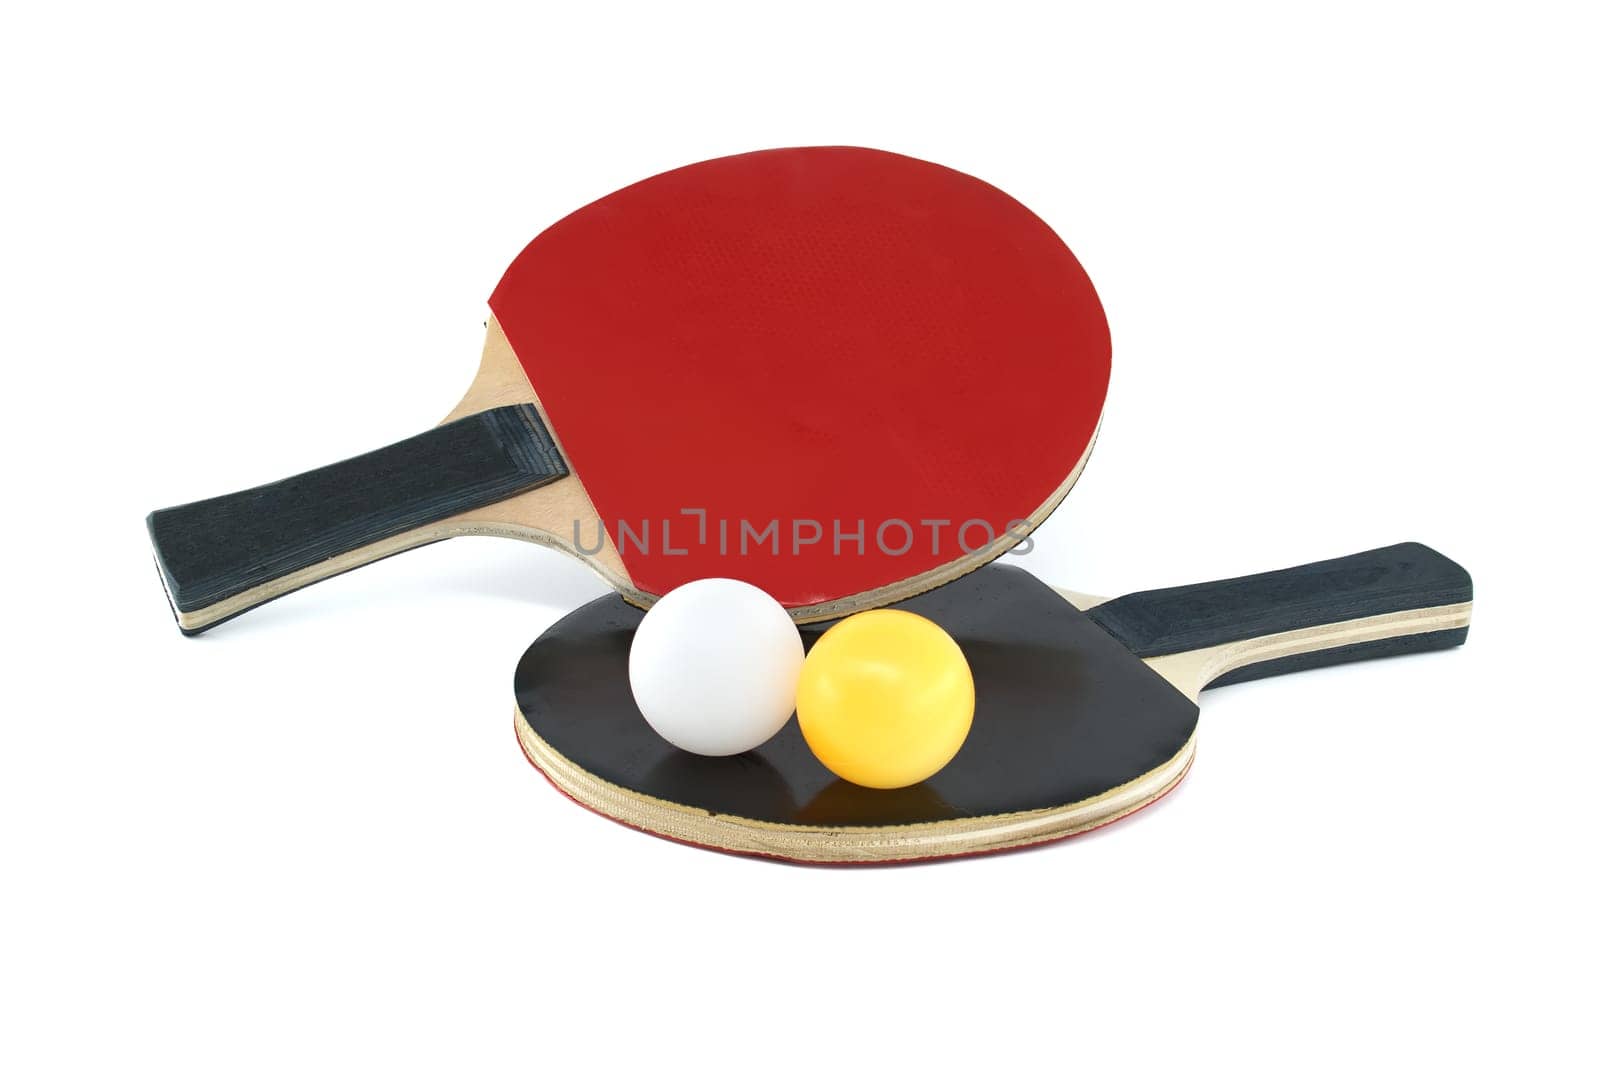 Ping pong paddles and balls isolated on white background by NetPix